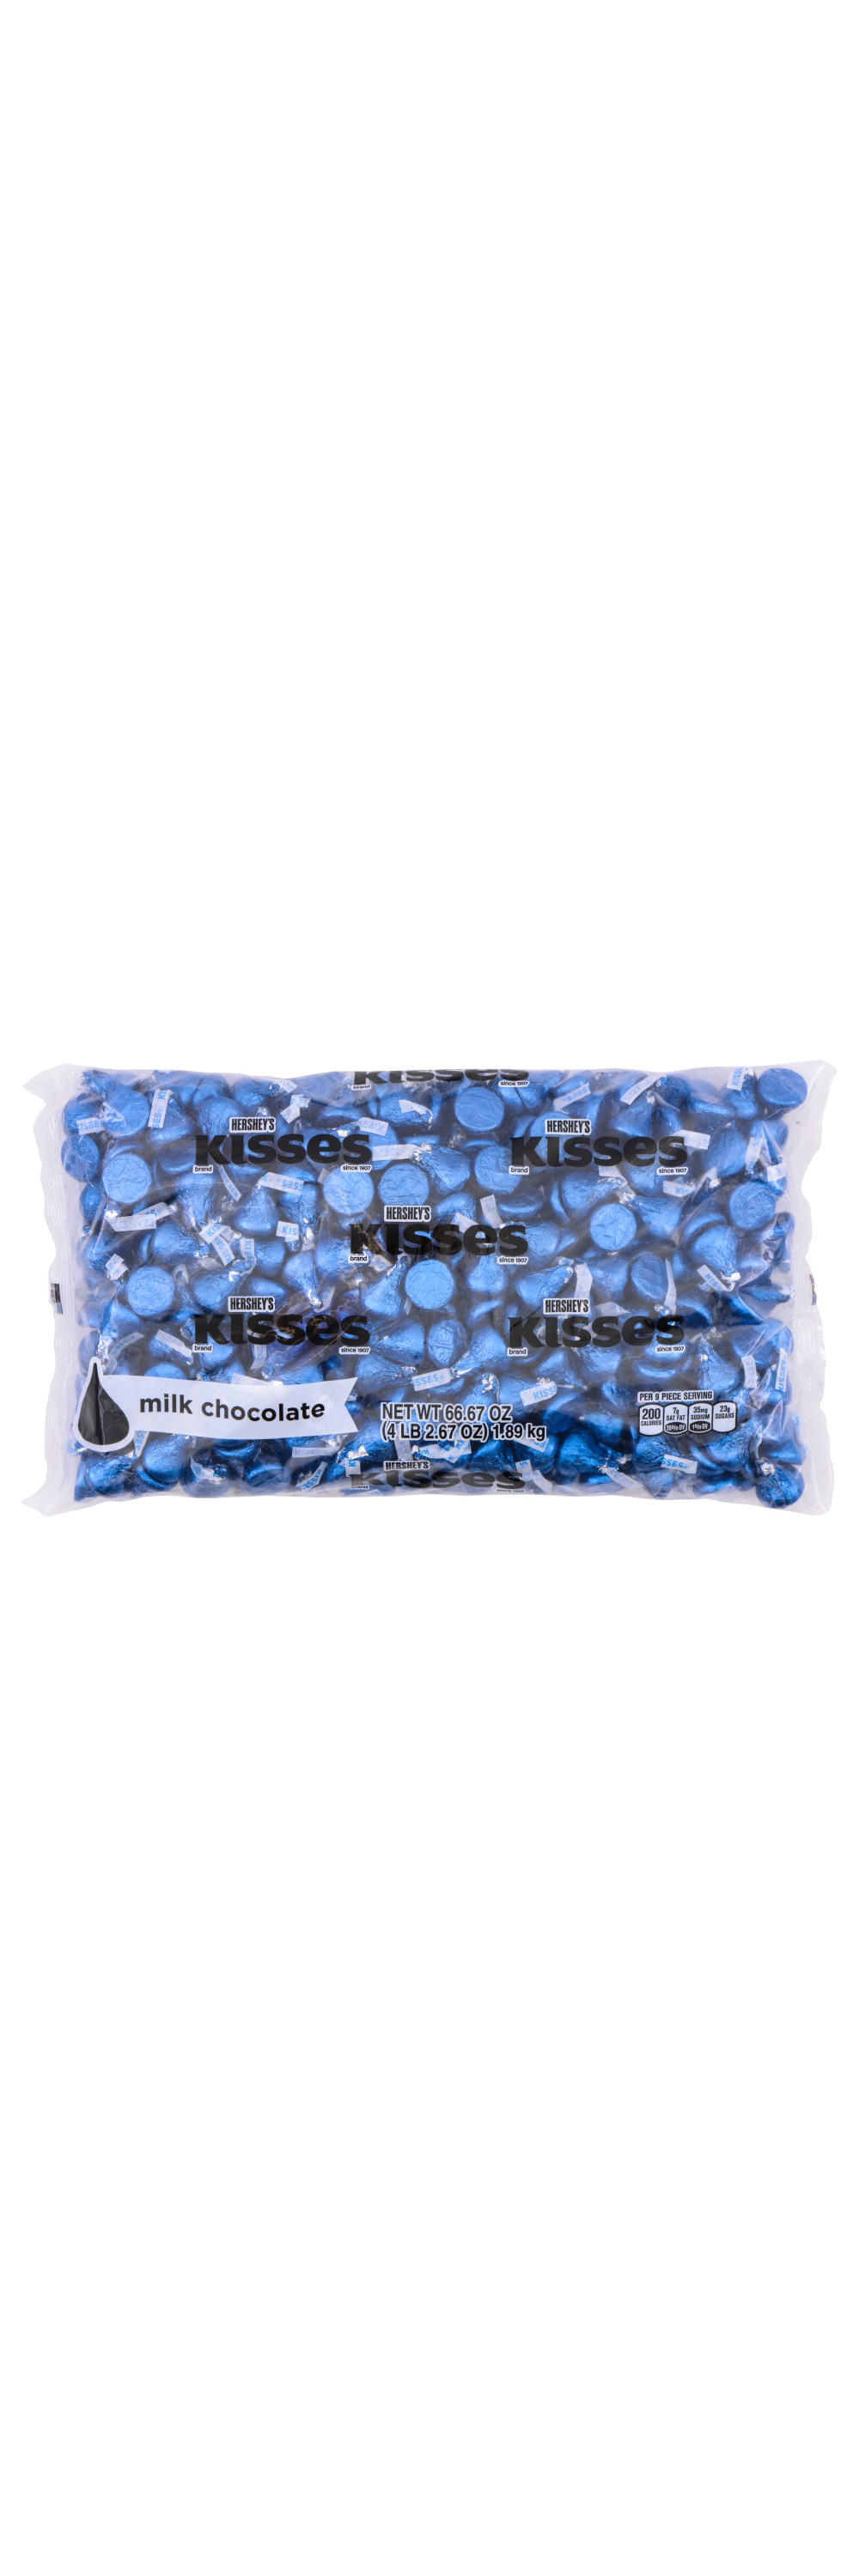 HERSHEY'S KISSES Dark Blue Foil Milk Chocolate Candy, 66.67 oz bag, 400 pieces - Front of Package